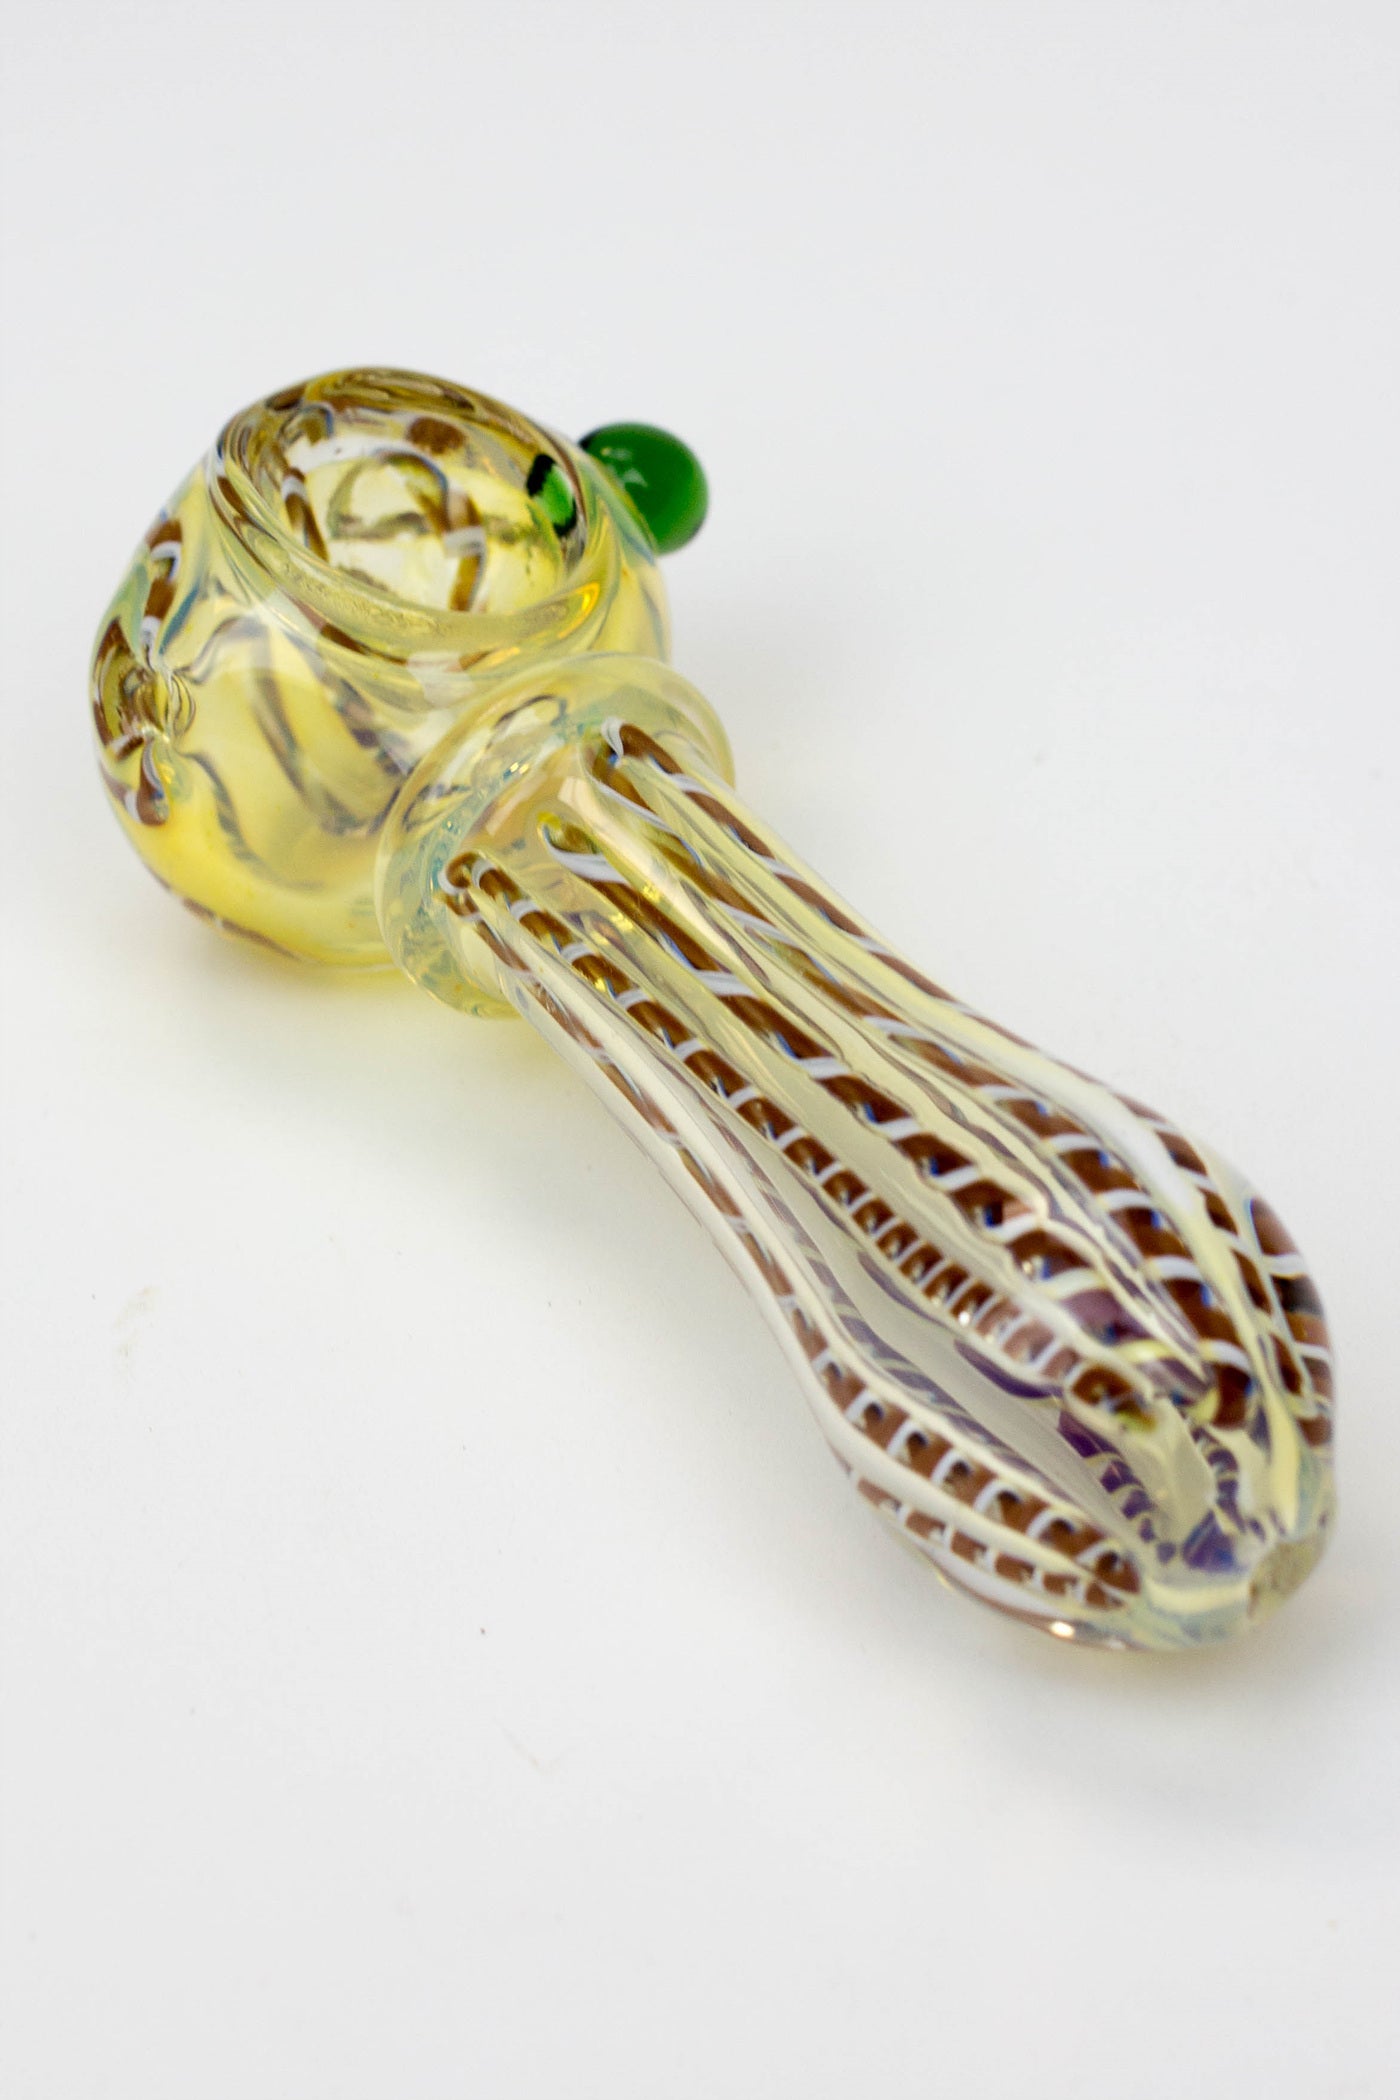 4.5" soft glass 8562 hand pipe - 160_2